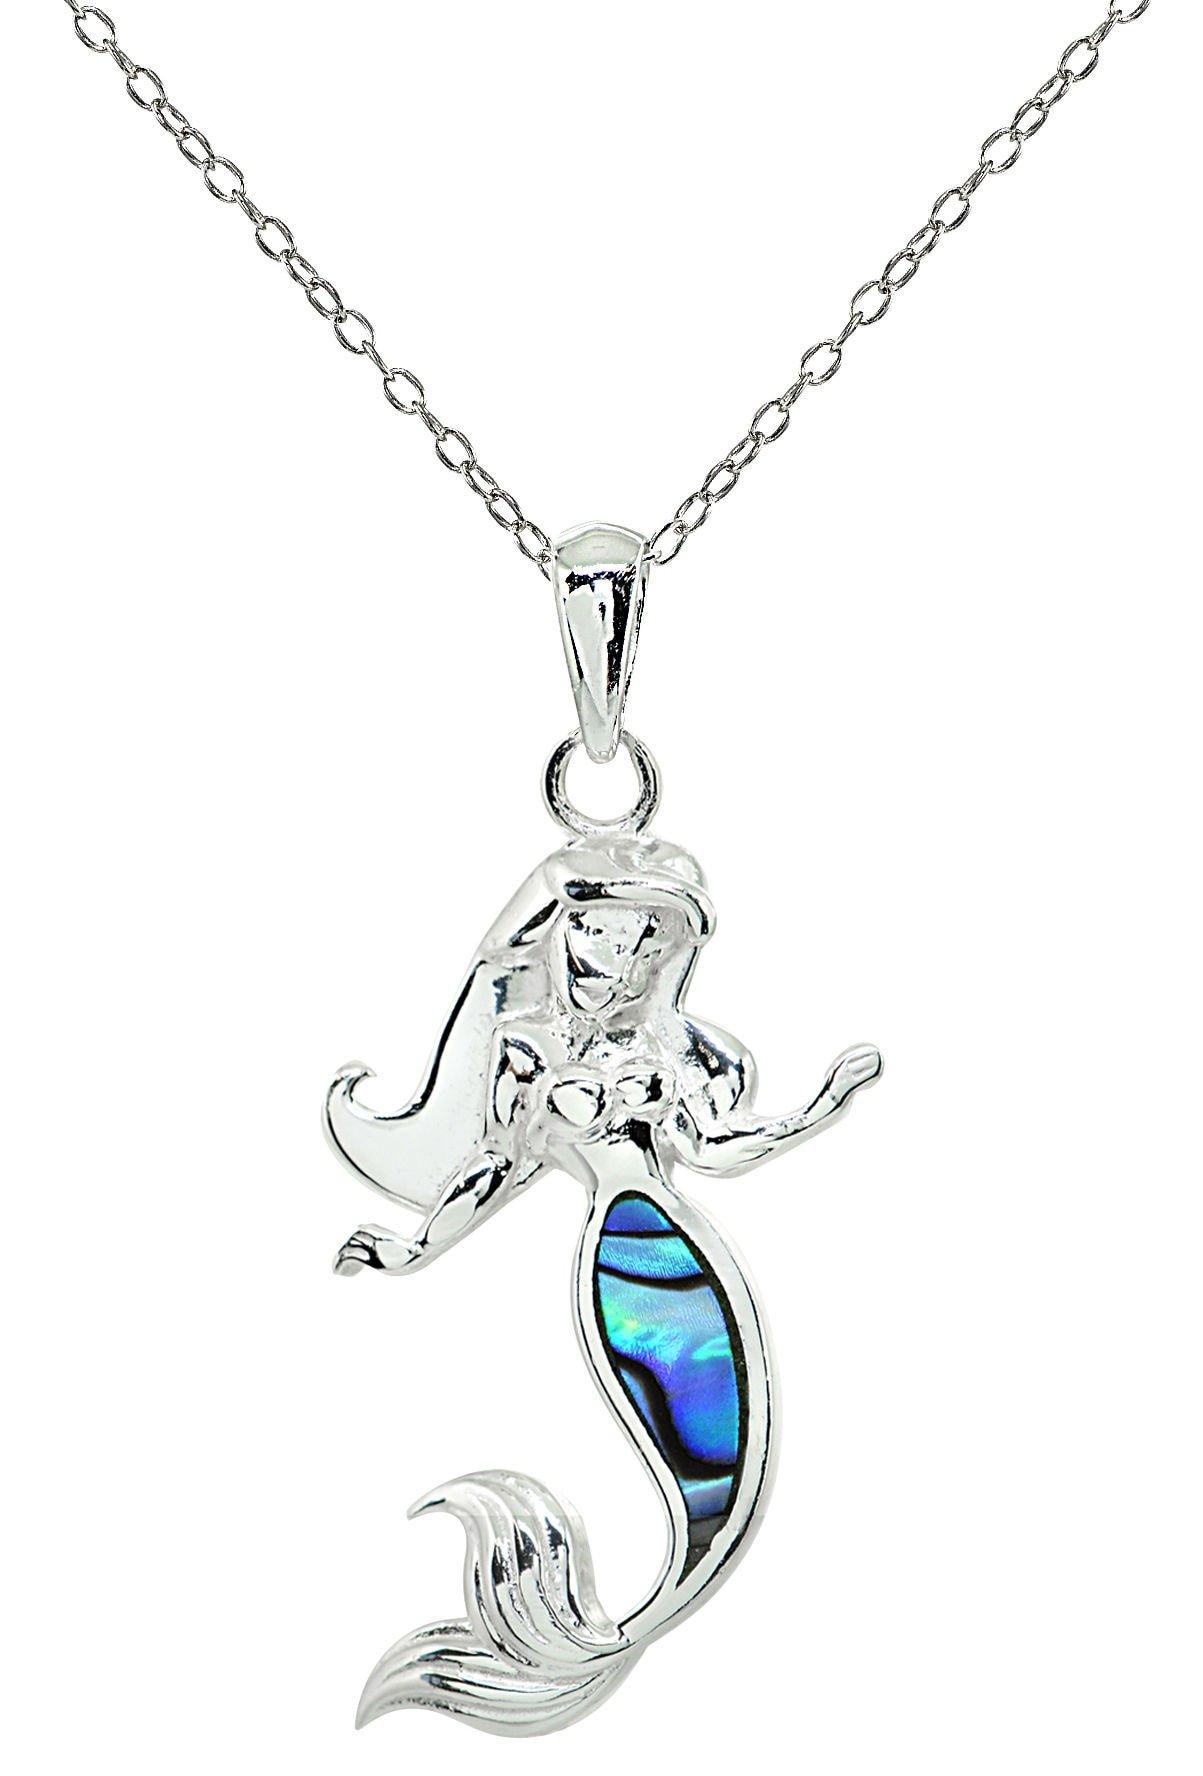 Beach Chic Silver Plated Abalone Mermaid Necklace